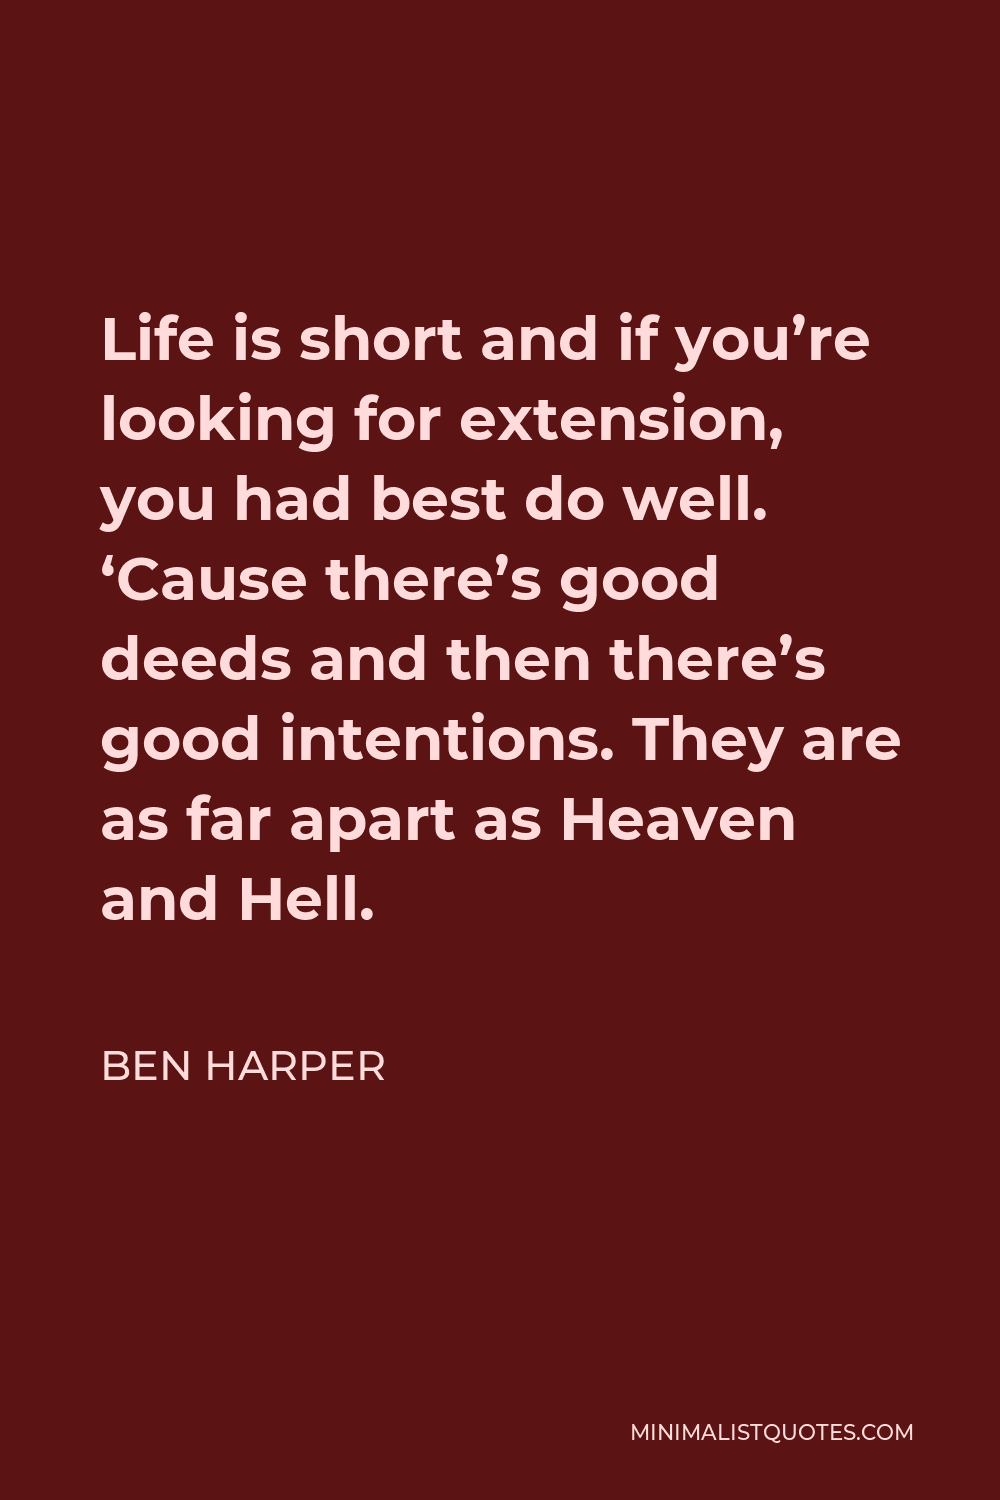 Ben Harper Quote - Life is short and if you’re looking for extension, you had best do well. ‘Cause there’s good deeds and then there’s good intentions. They are as far apart as Heaven and Hell.